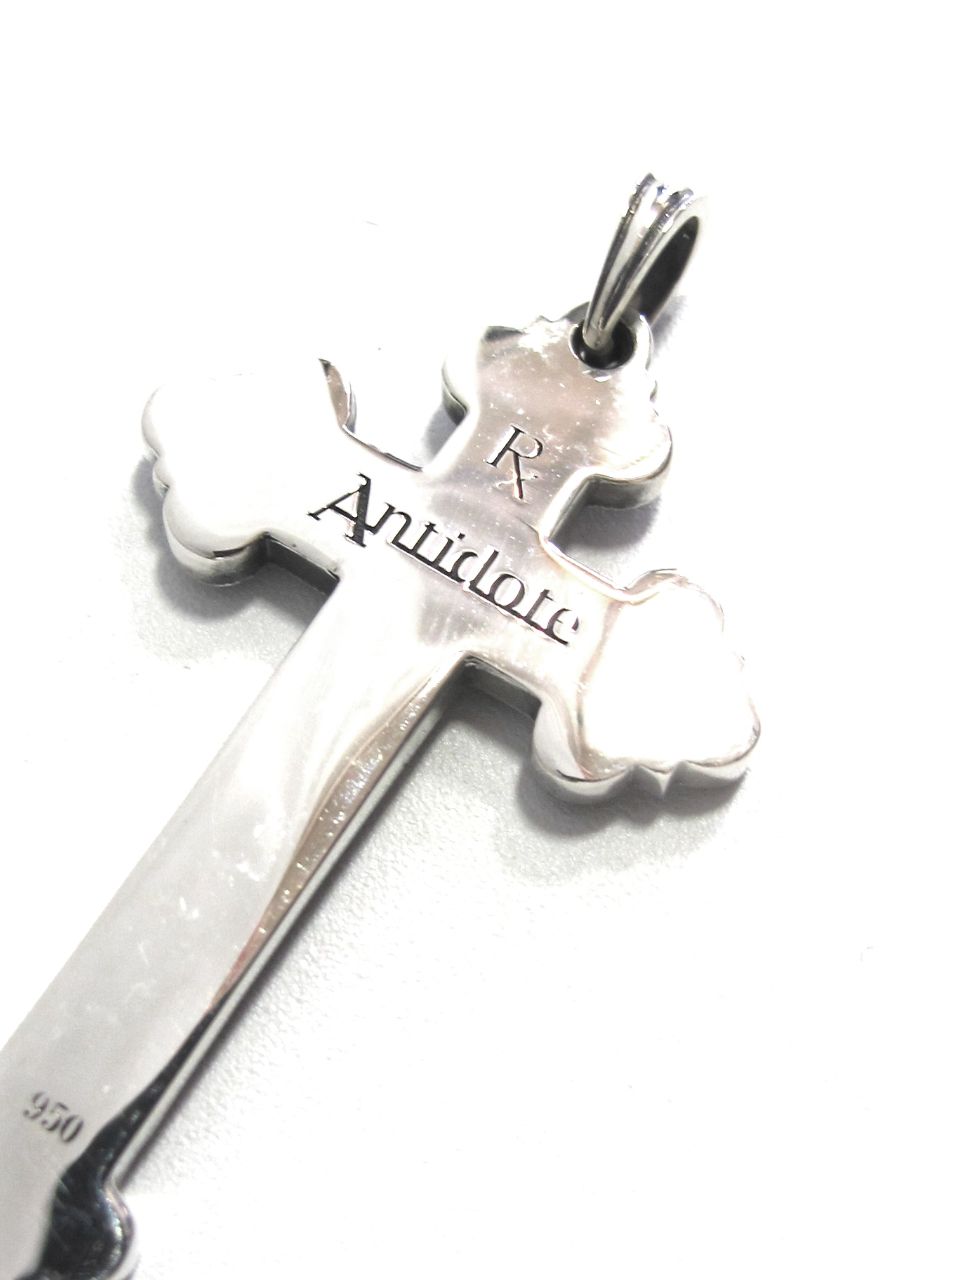 ANTIDOTE BUYERS CLUB - ENGRAVED LARGE CROSS PENDANT (SILVER 